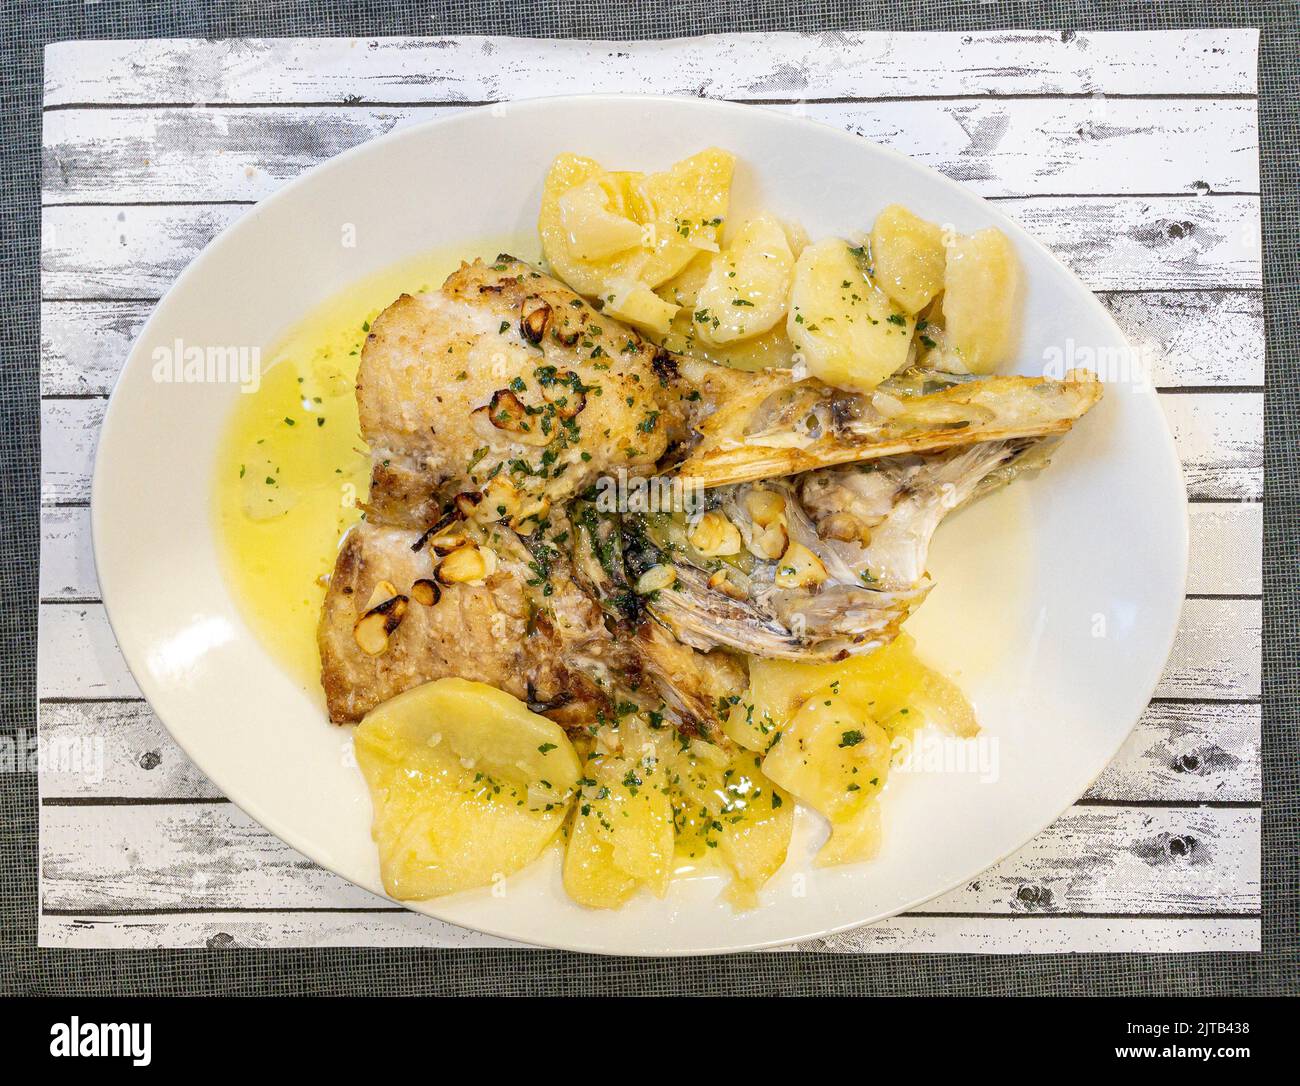 Hake nape cut on the grill, seasoned with parsley oil and garlic. Basque country cuisine. Stock Photo